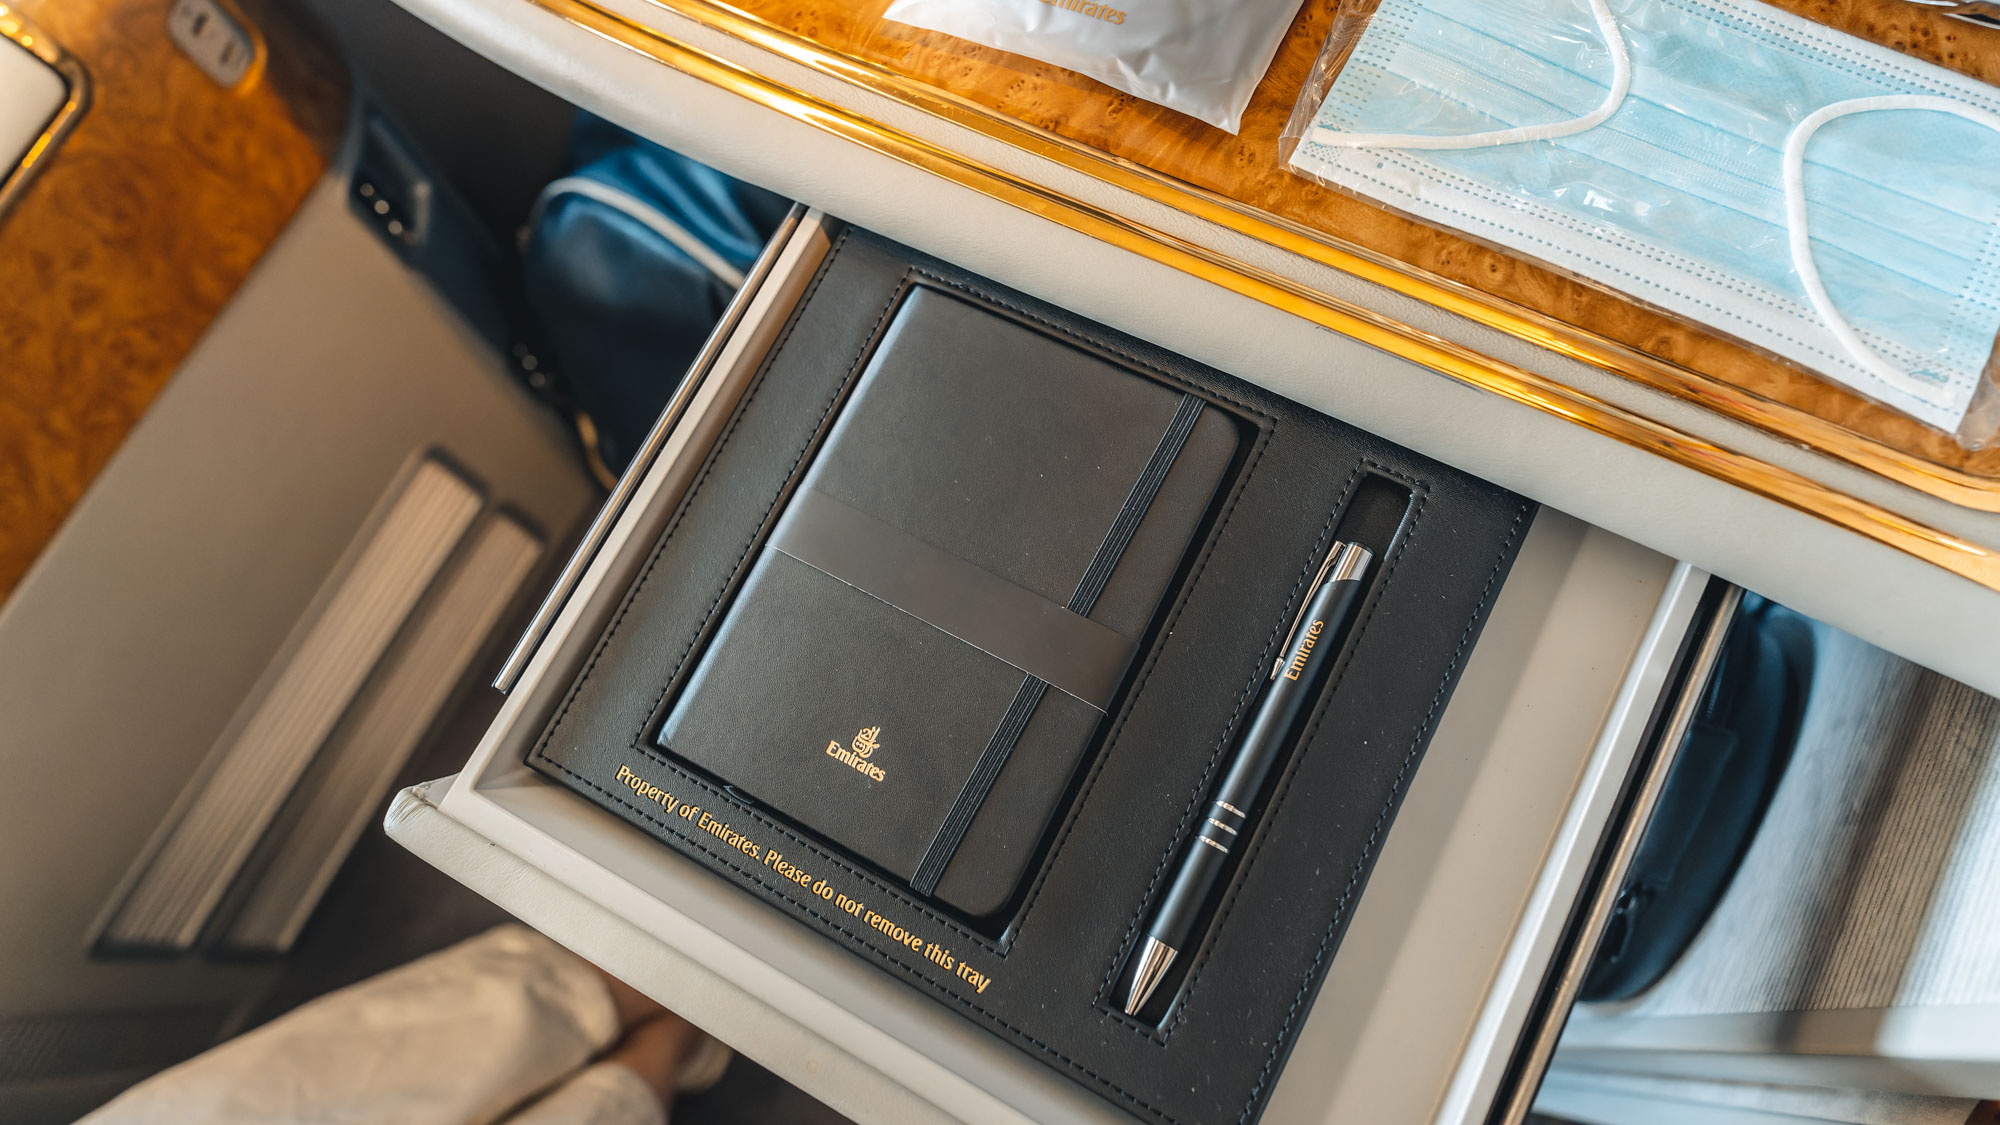 Emirates Boeing 777 First Class writing kit